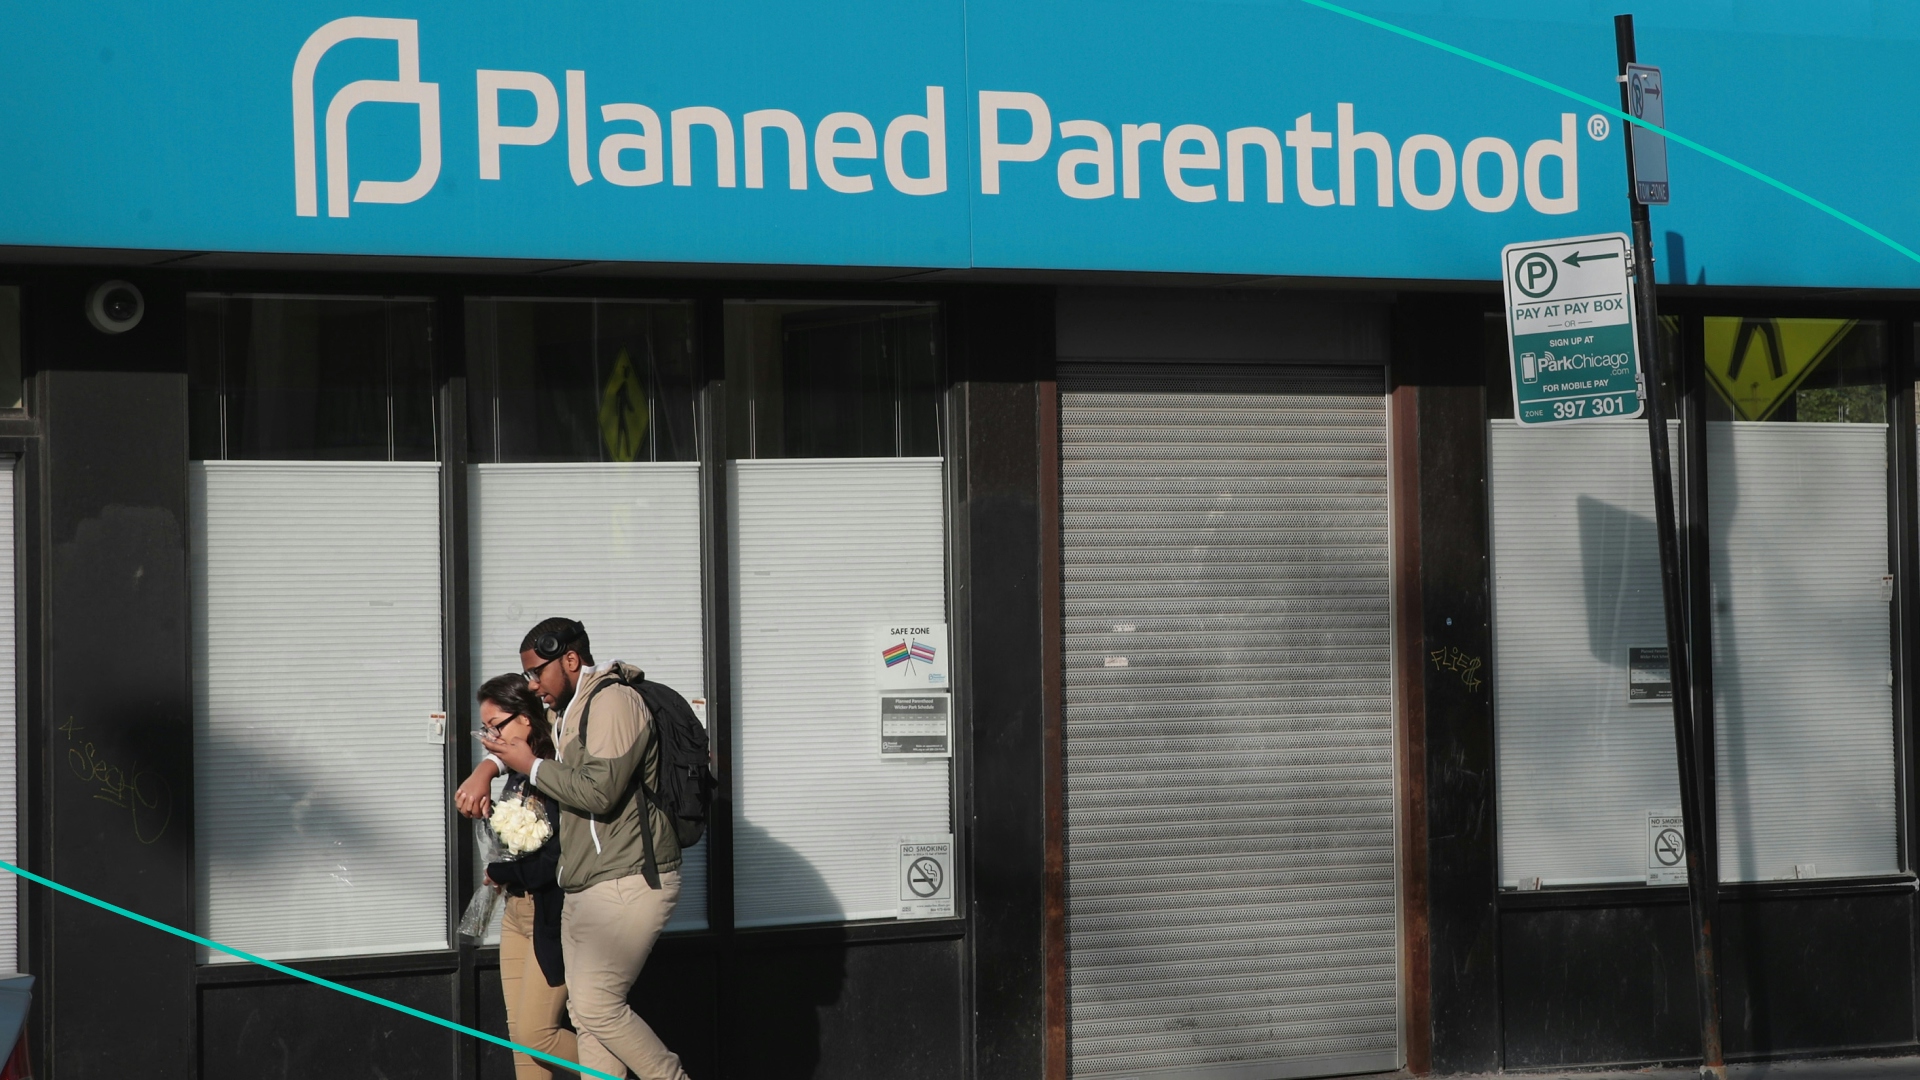 Two pedestrians walk by the Planned Parenthood clinic in Chicago, Illinois